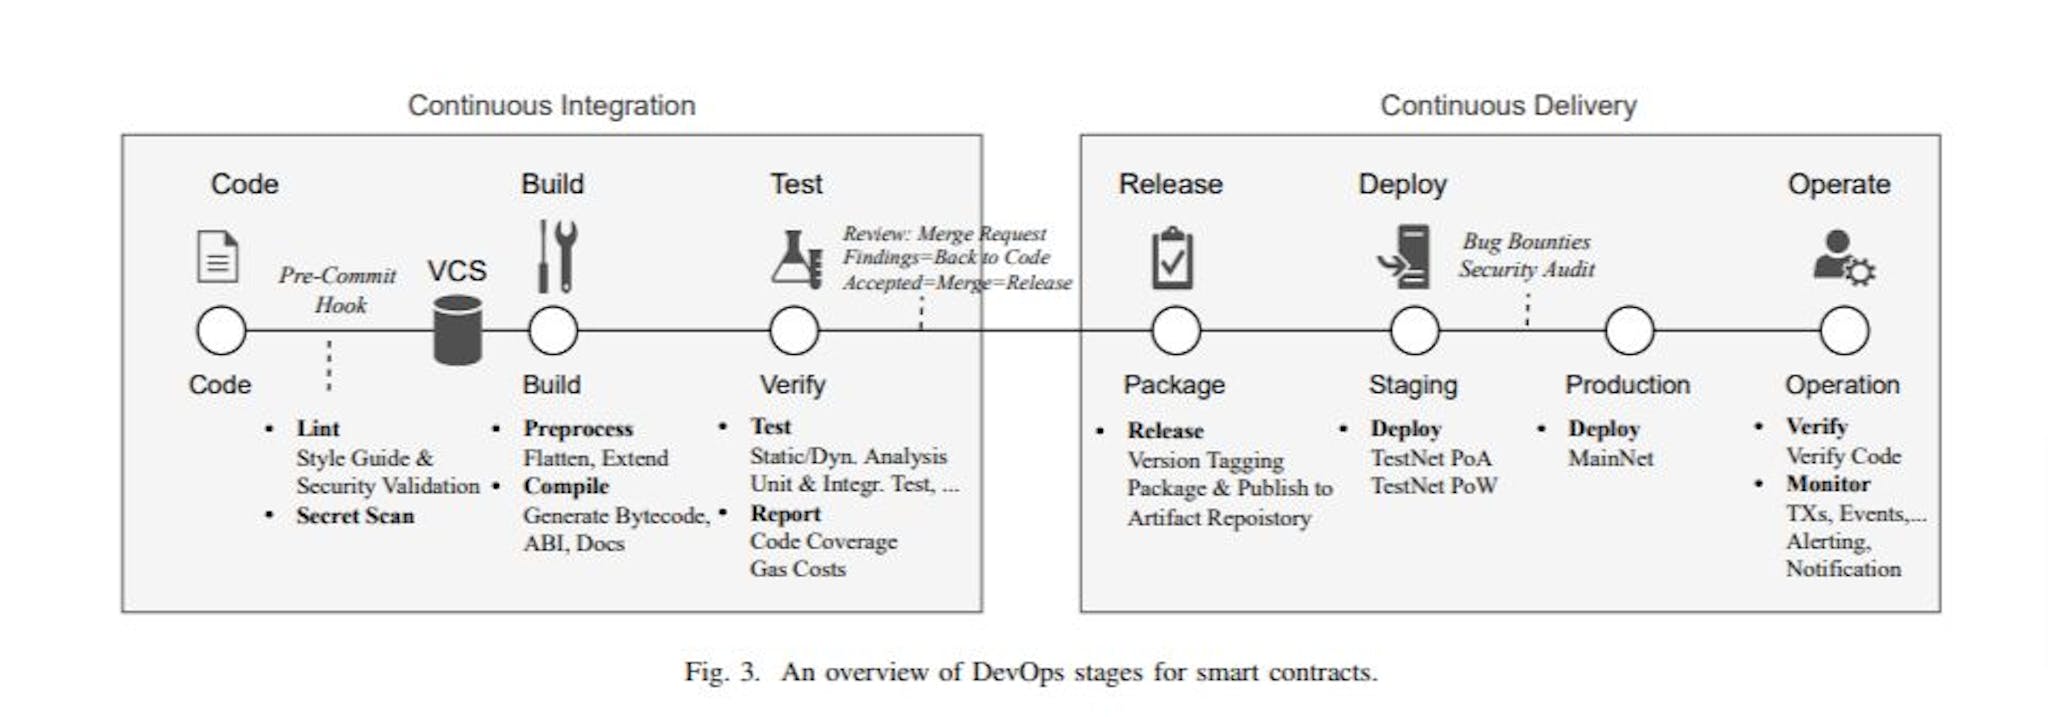 Image source: DevOps for Ethereum Blockchain Smart Contracts by Maximilian Wohrer and Uwe Zdun